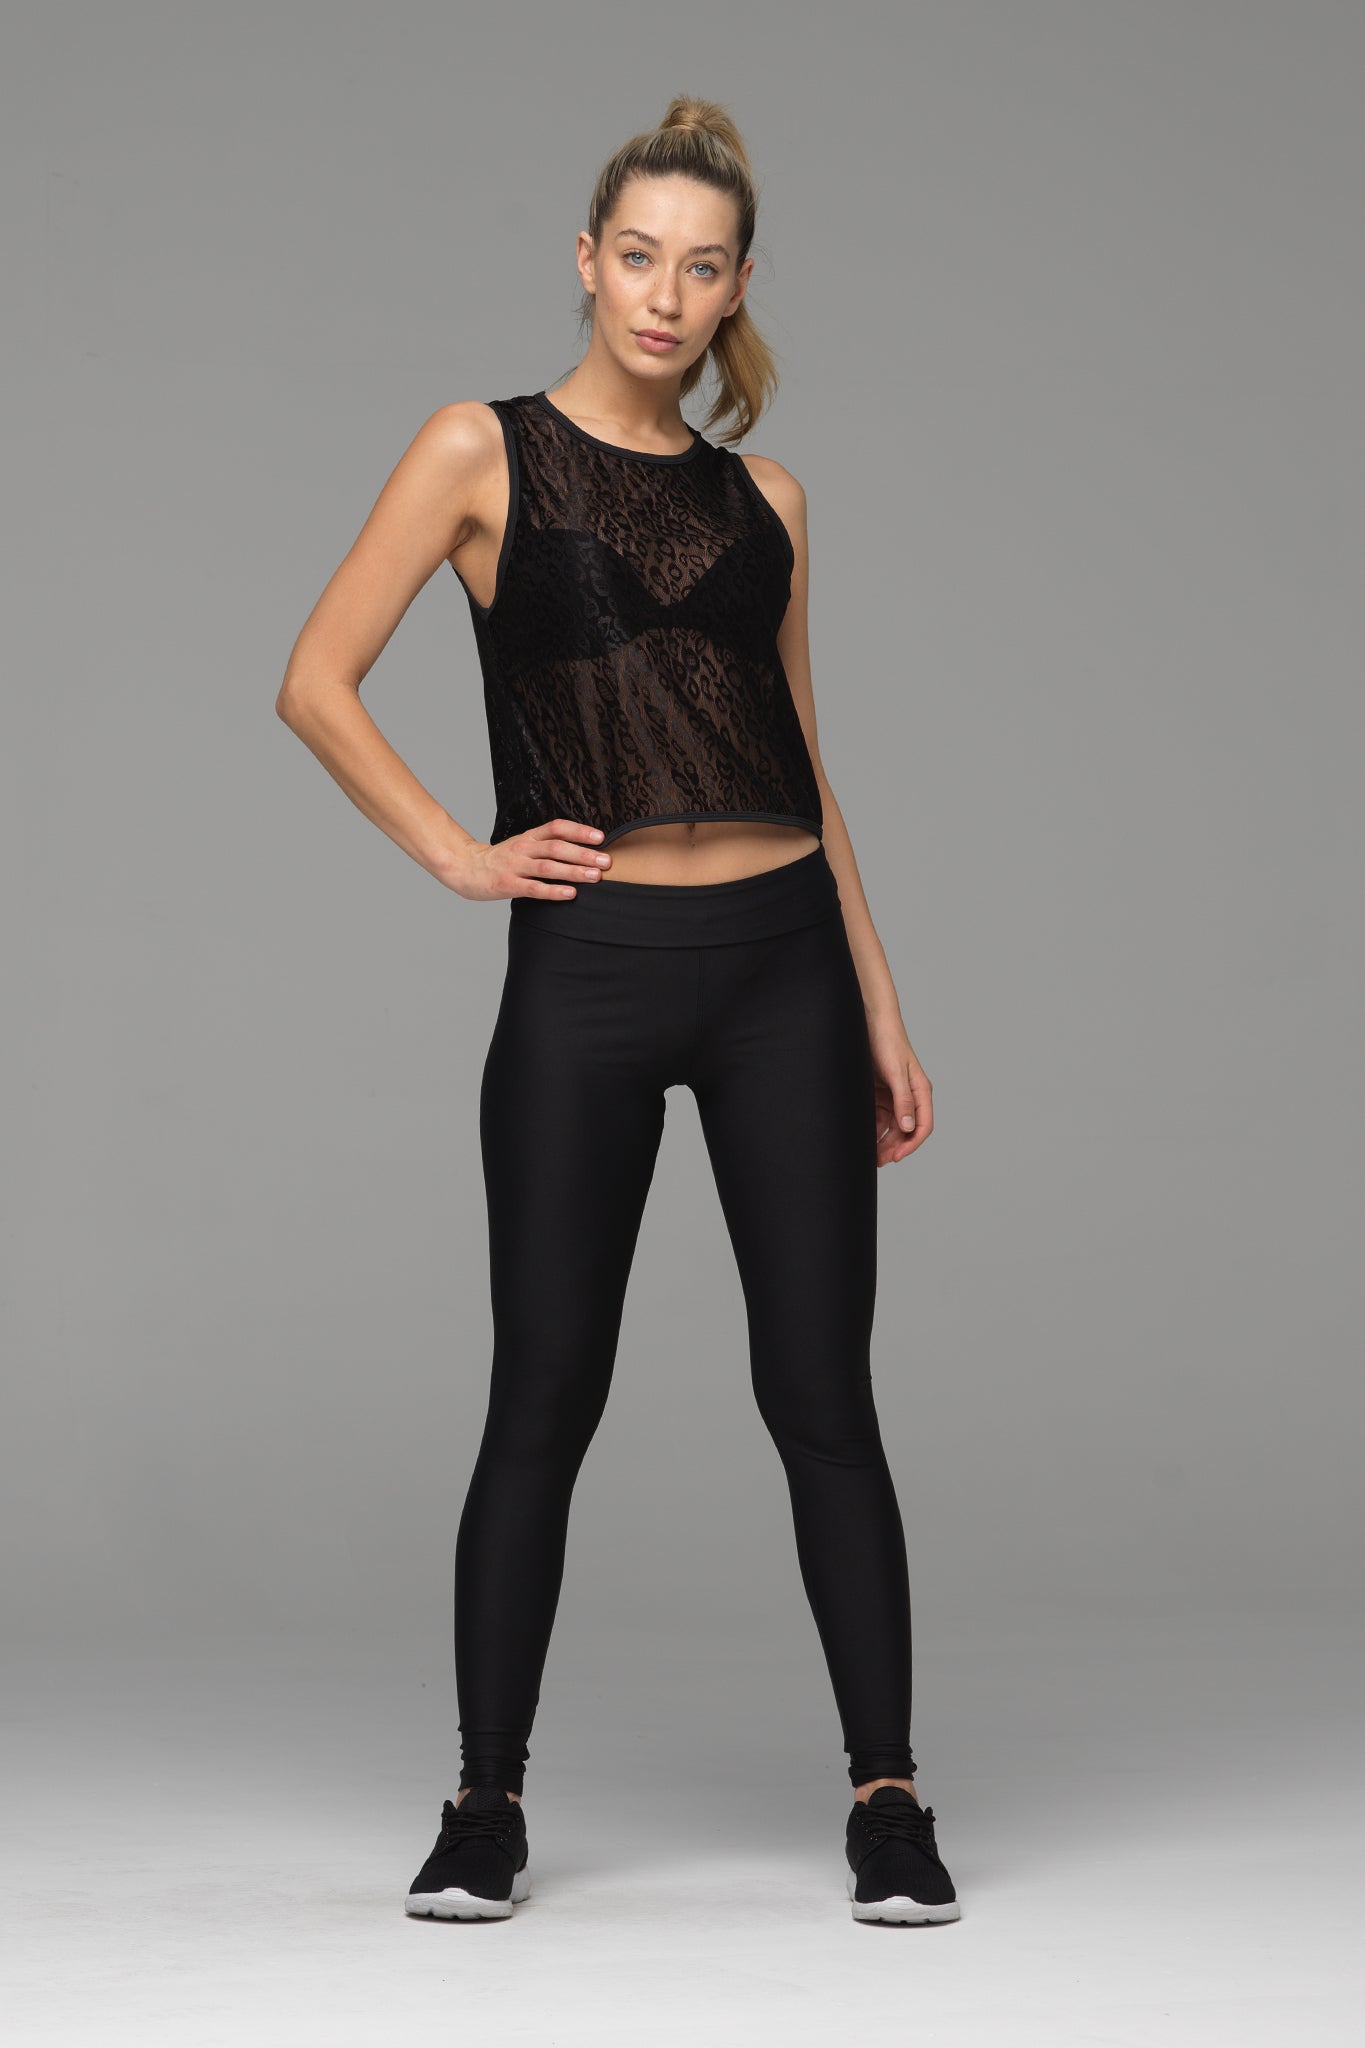 Billion Dollar Baby full length legging in solid black. Shown here with waistband rolled down